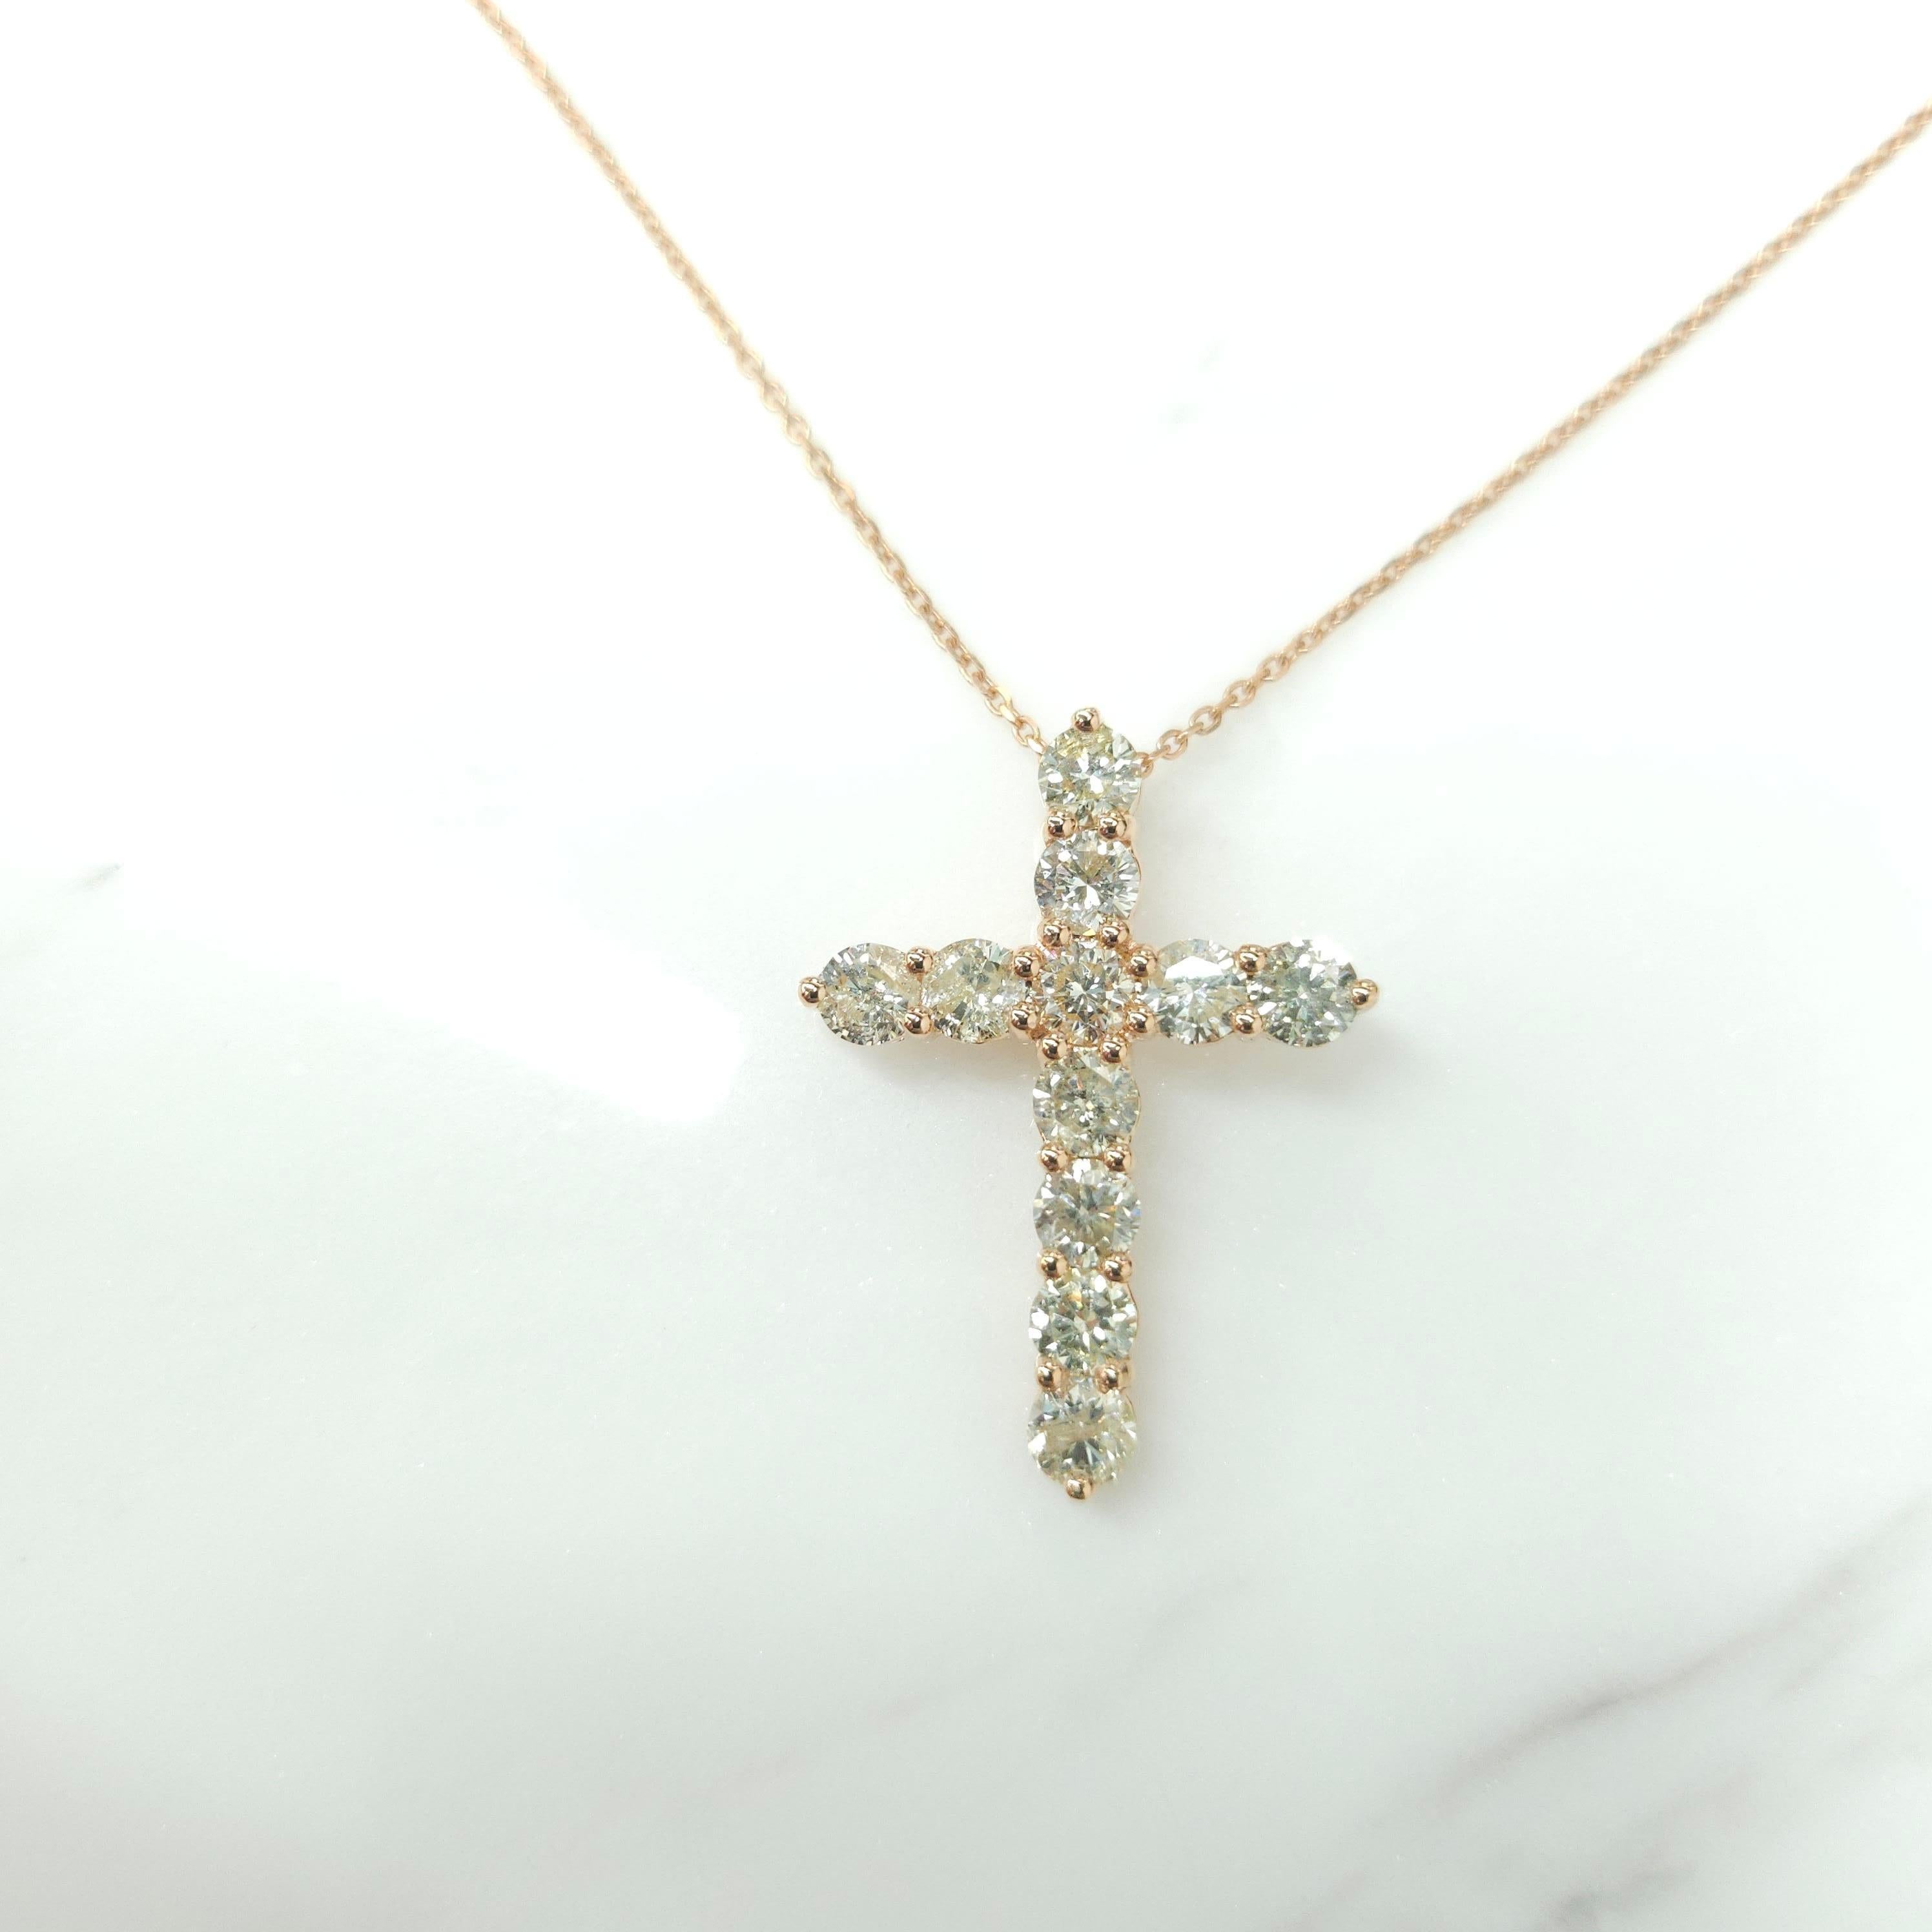 A precious interpretation of a classic motif, our cross pendant in 18K rose gold is available in a variety of different carat weights, seen here with 0.23 carat diamonds. Deftly suspended from a gold chain, each diamond is embraced by a minimal